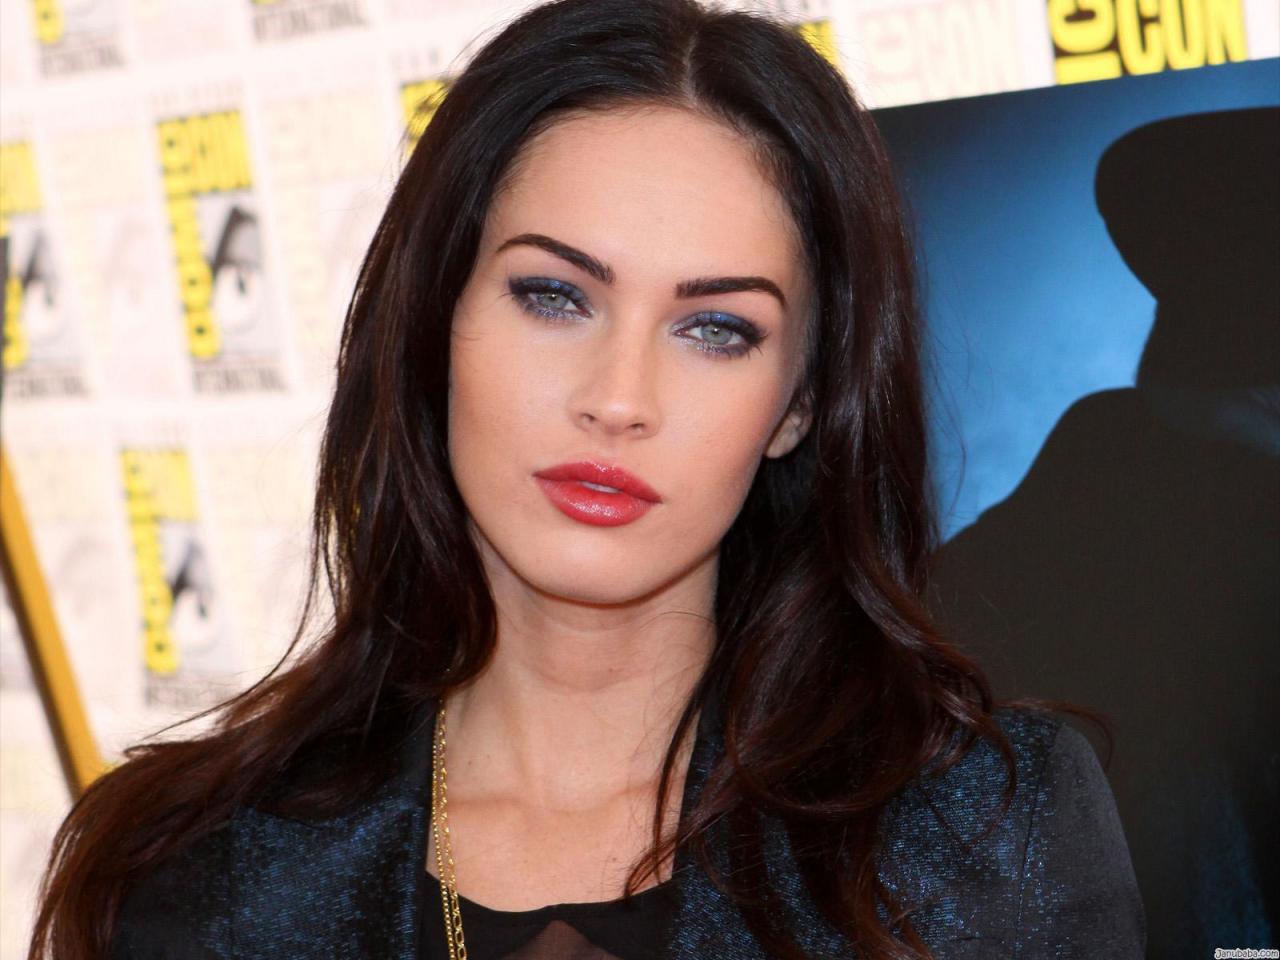 Megan Fox: From ‘Transformers’ Star to Hollywood Icon